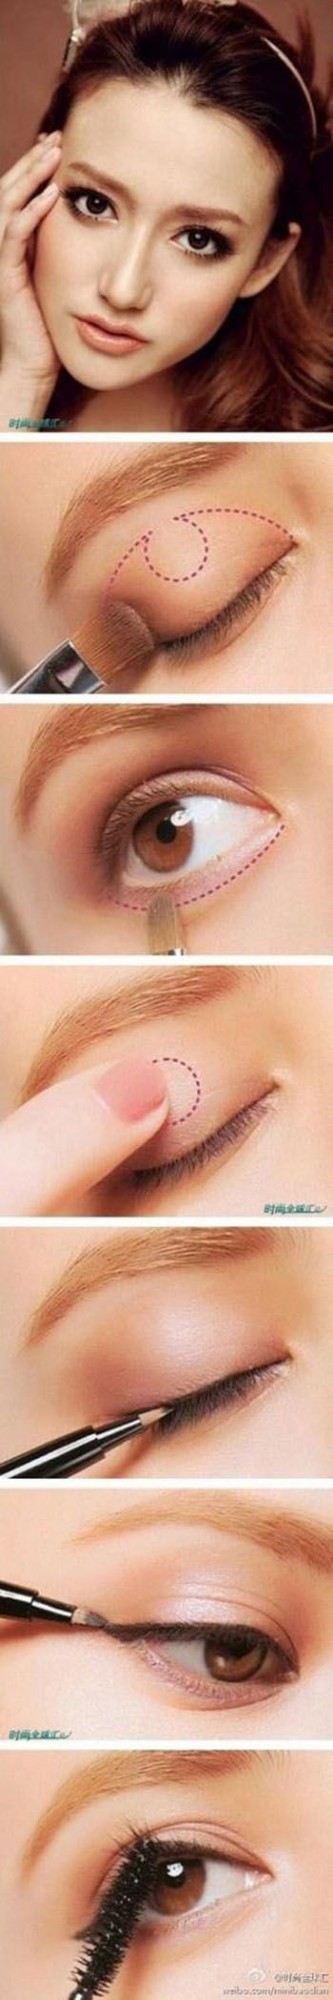 Soft and Natural Makeup Look Ideas and Tutorials (11)